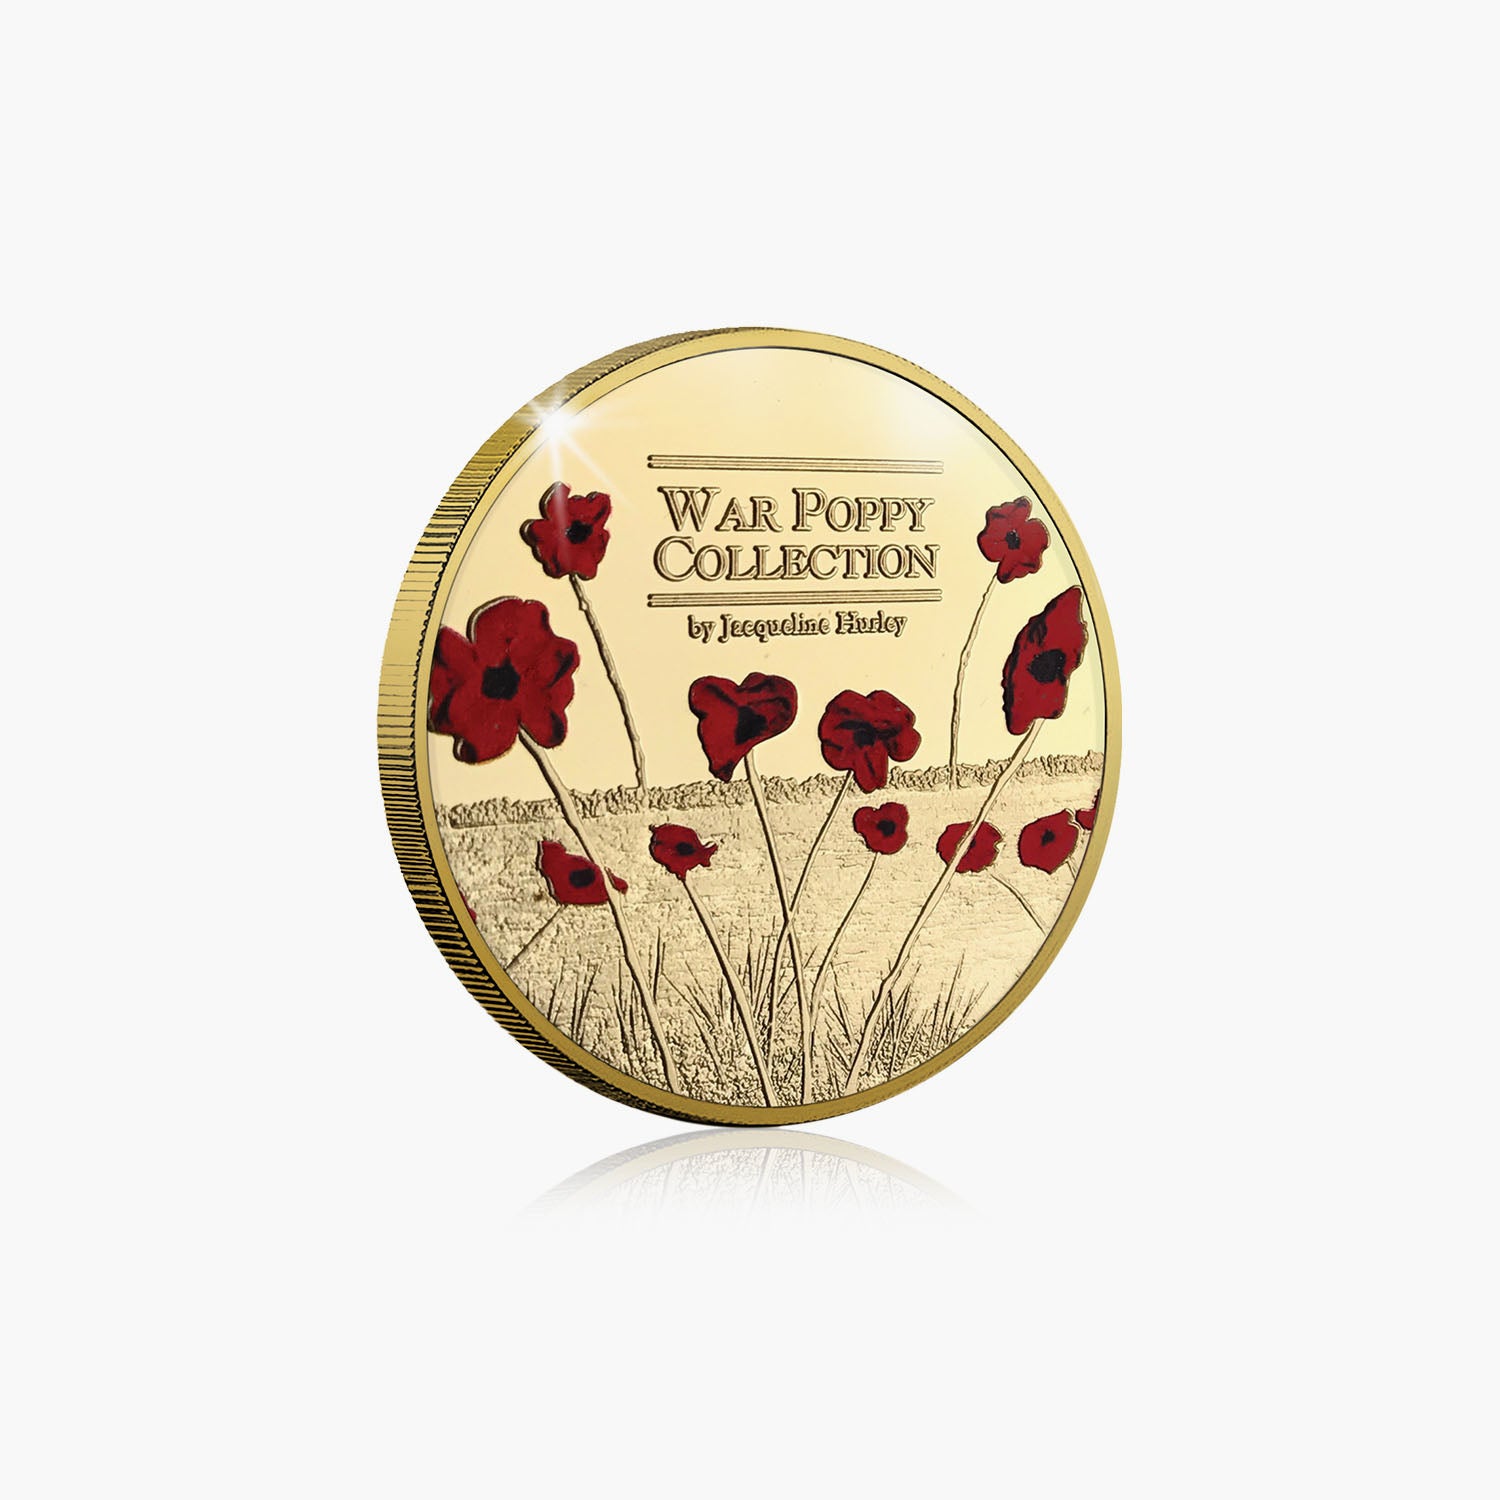 Mission of Remembrance Gold-Plated Commemorative